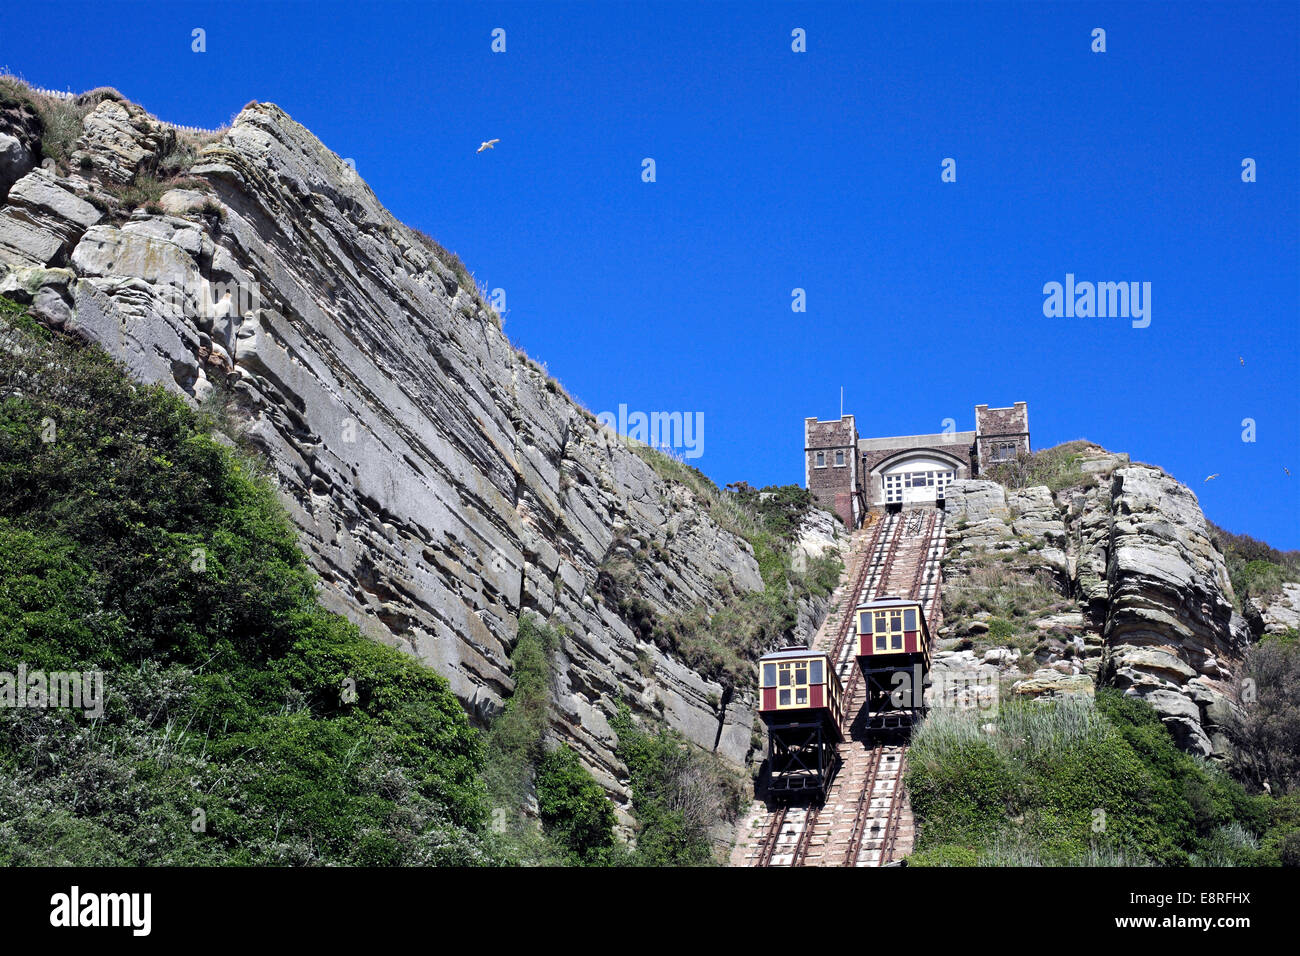 Cliffs in Hastings next to the East Hill Lift funicular railway overlooking Rock-a-Nore Road. Stock Photo